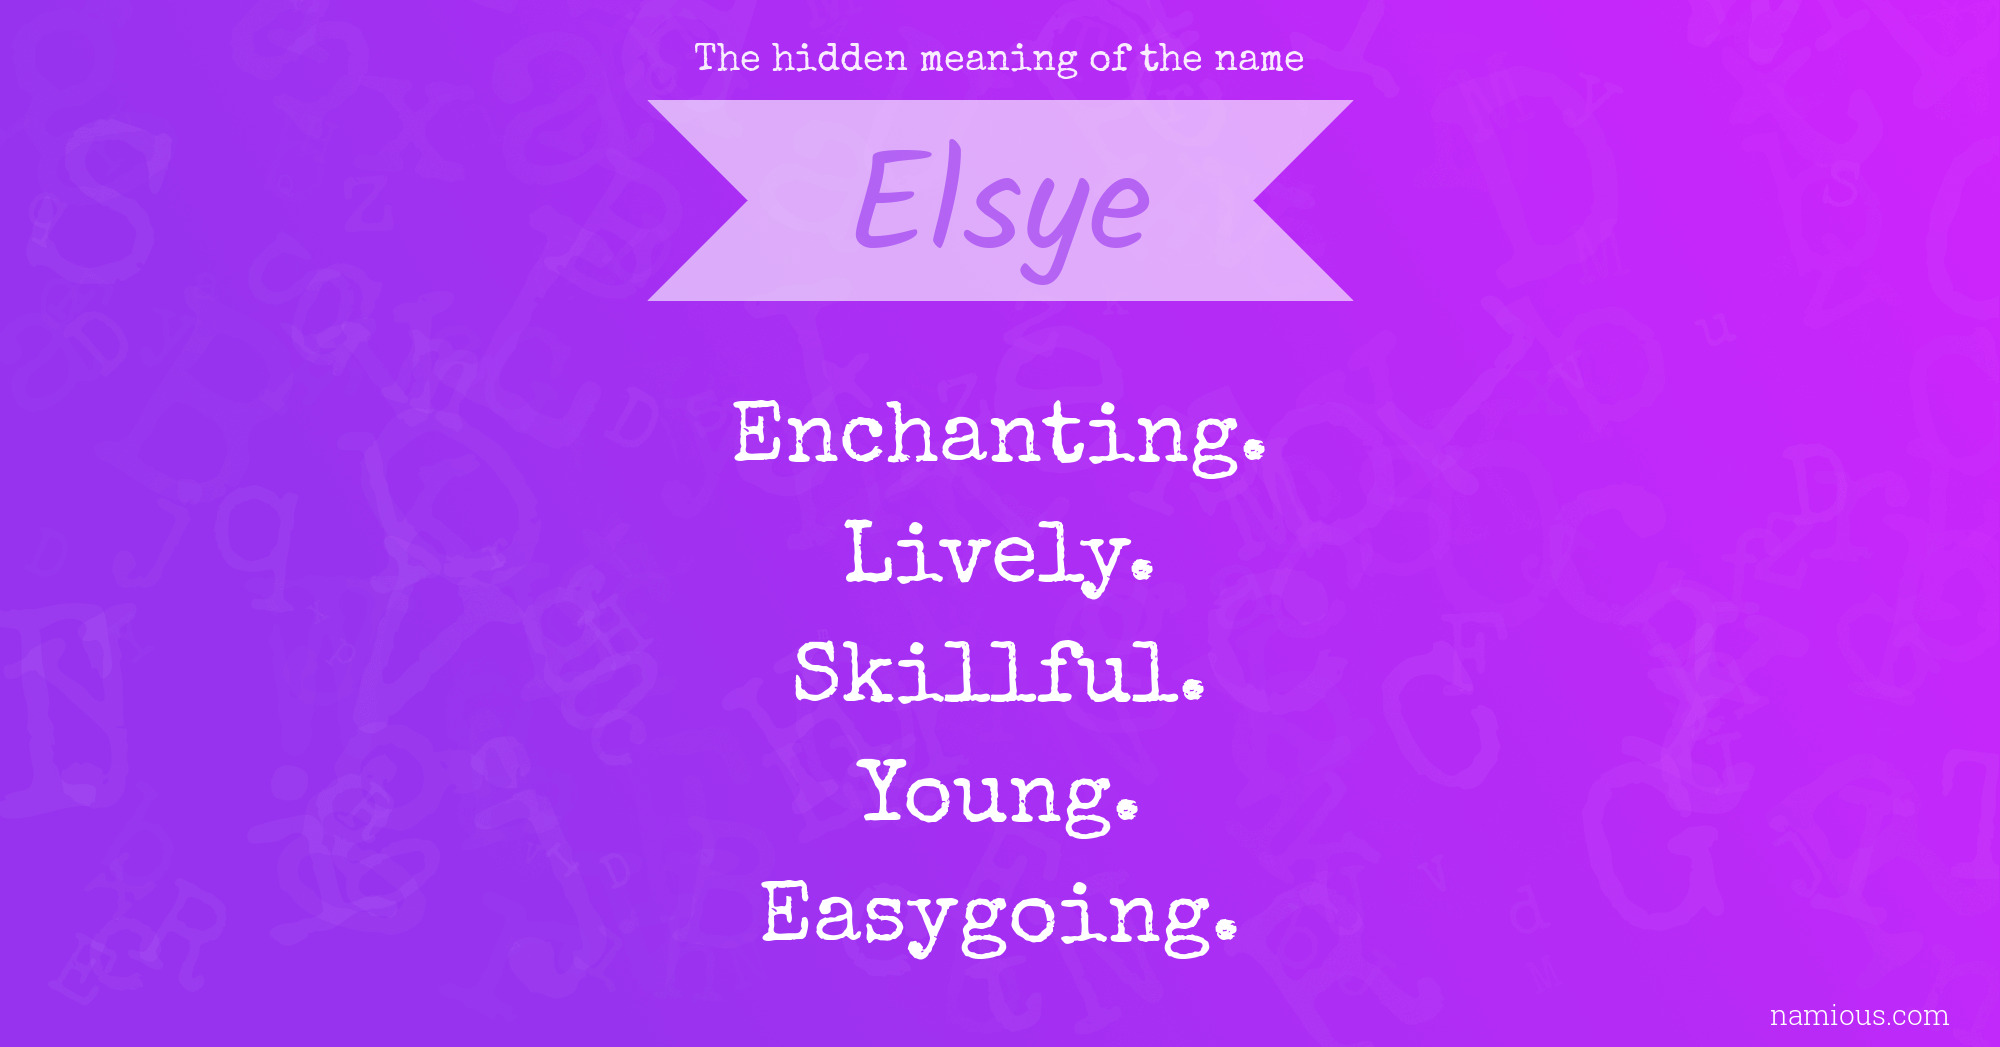 The hidden meaning of the name Elsye